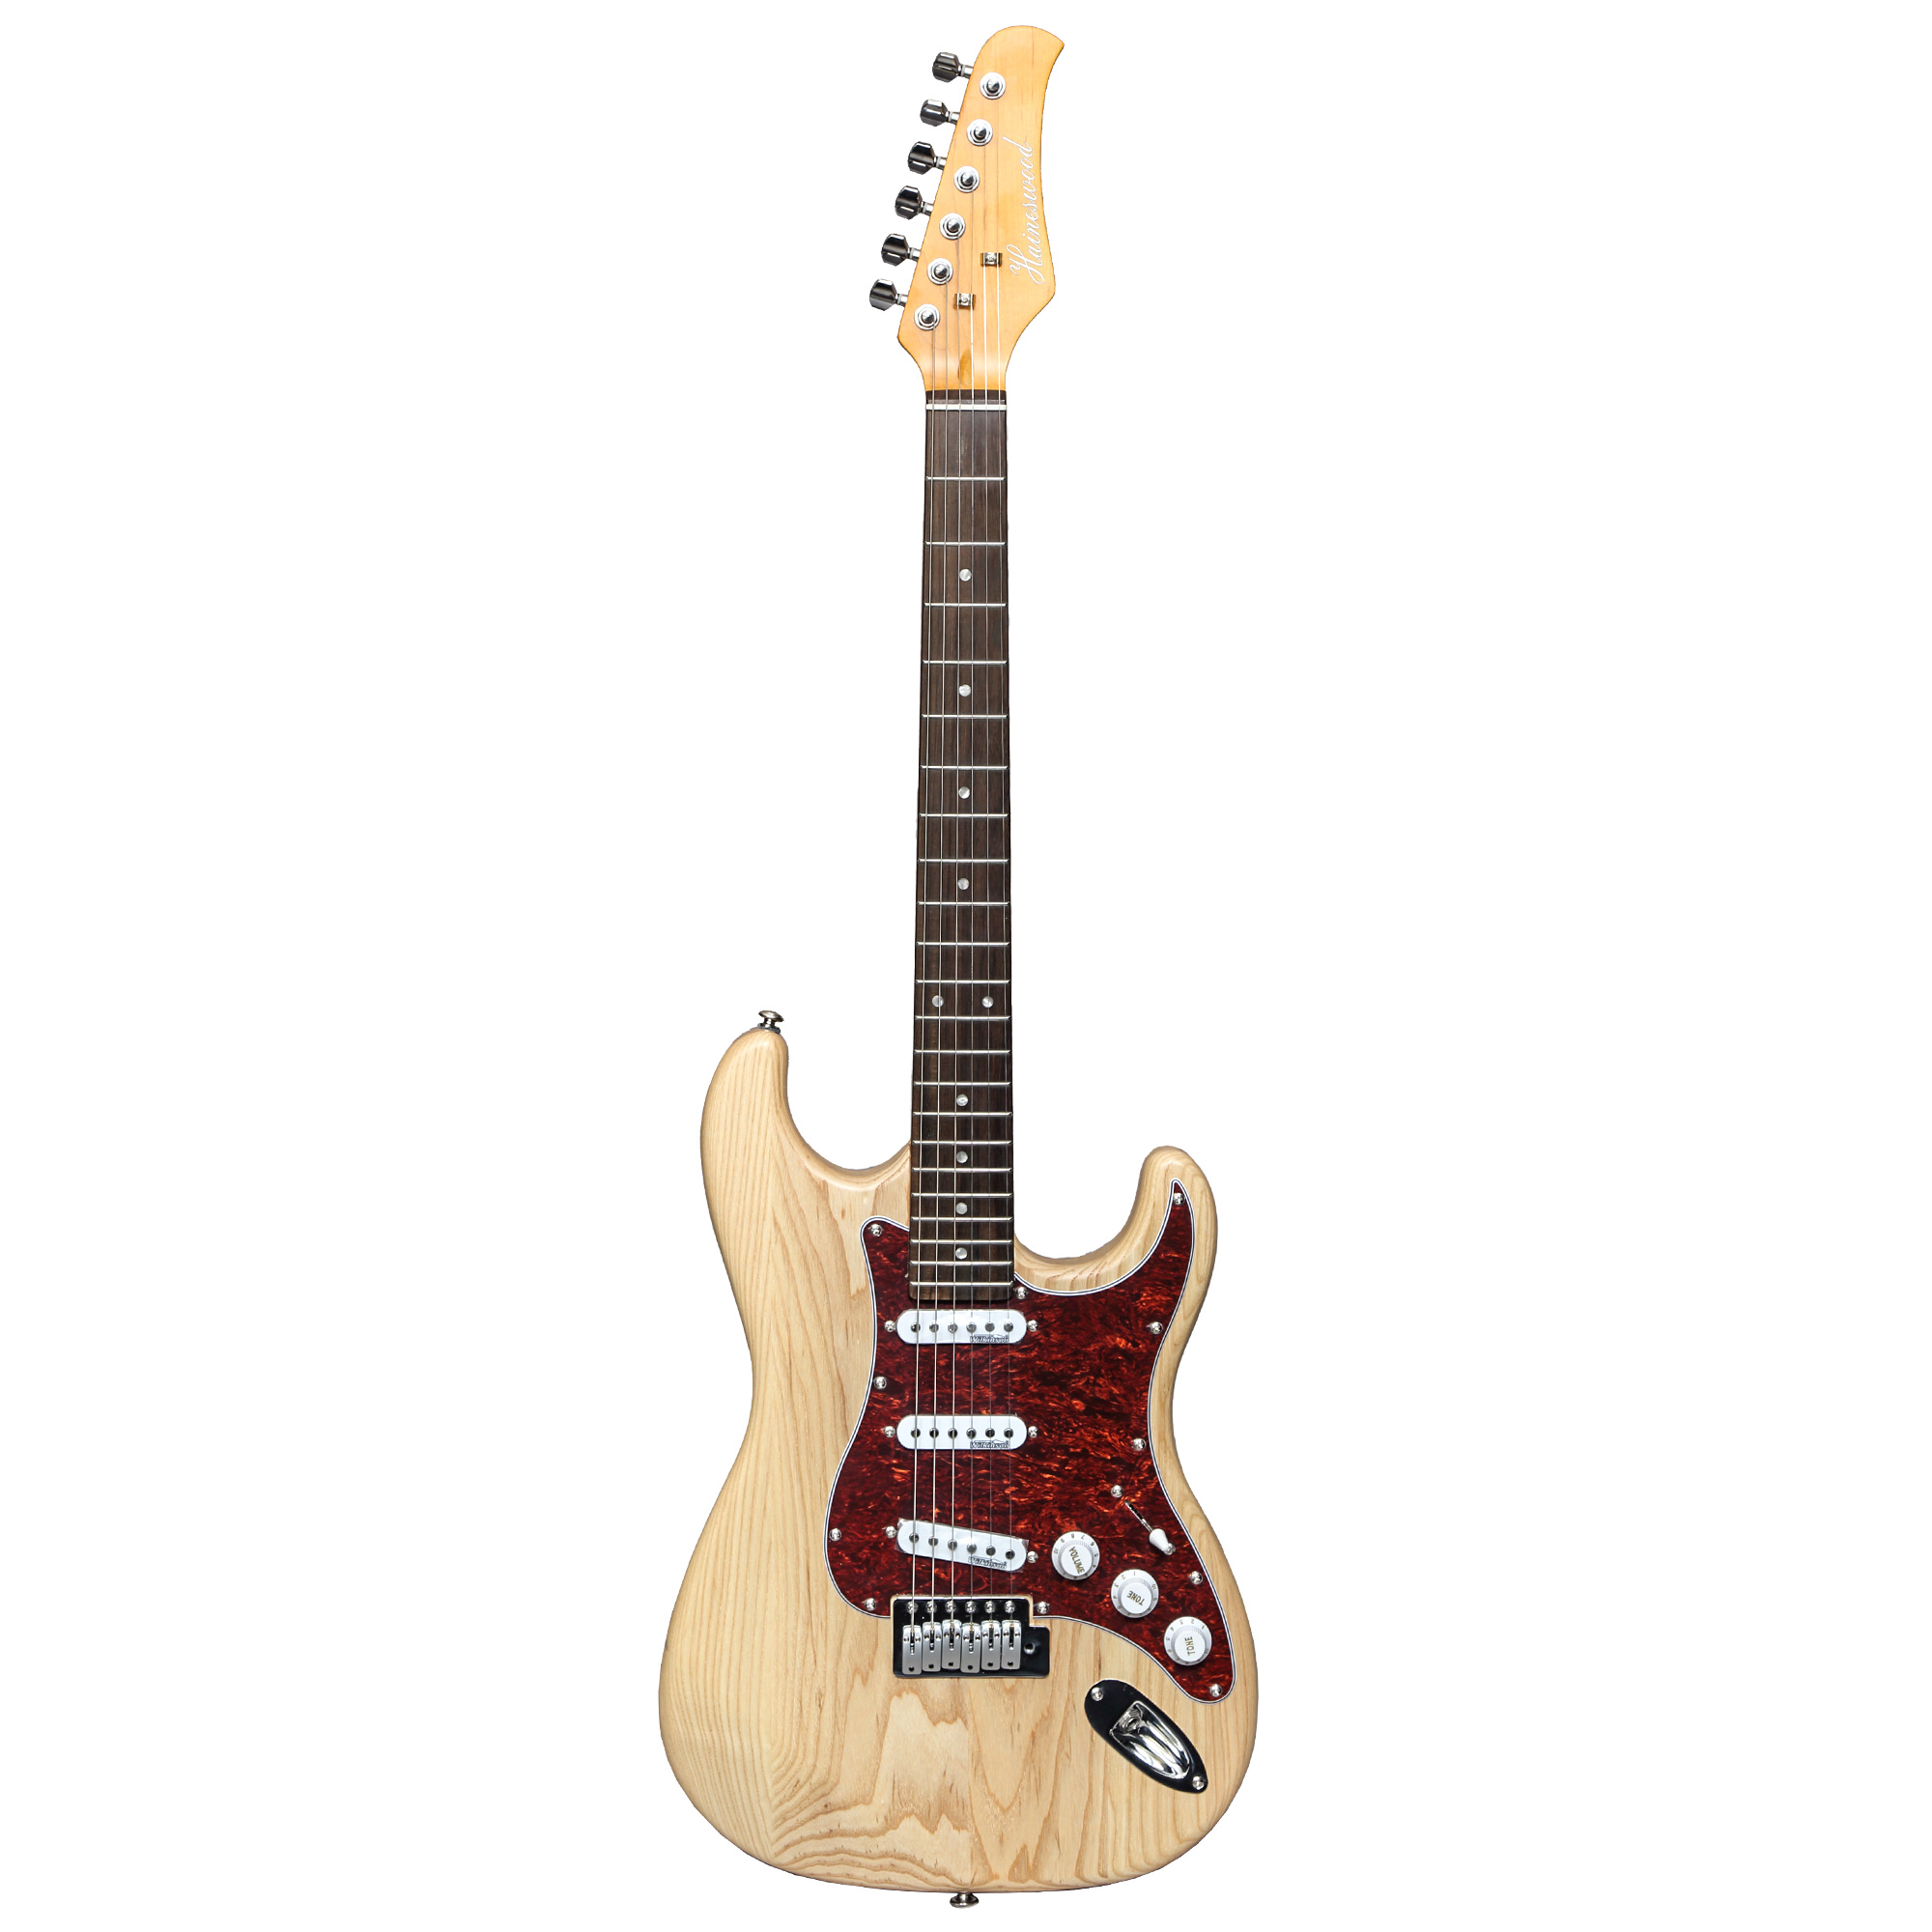 Haineswood Expedition Series ST-A-ASH Strat Electric Guitar (Natural, Ash Wood Top)